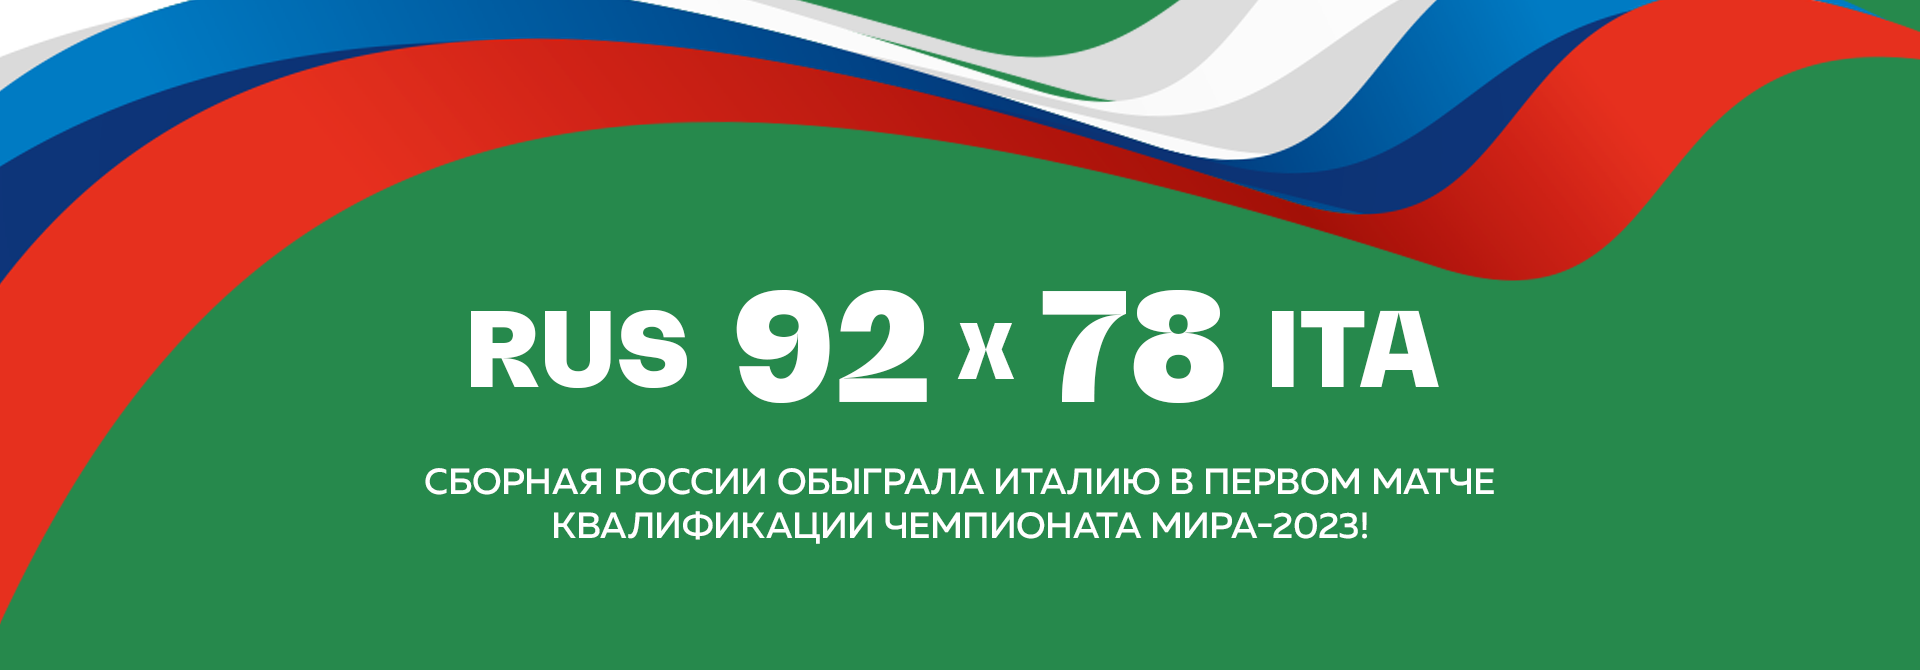 UNICS players helped the Russian national team beat Italy!